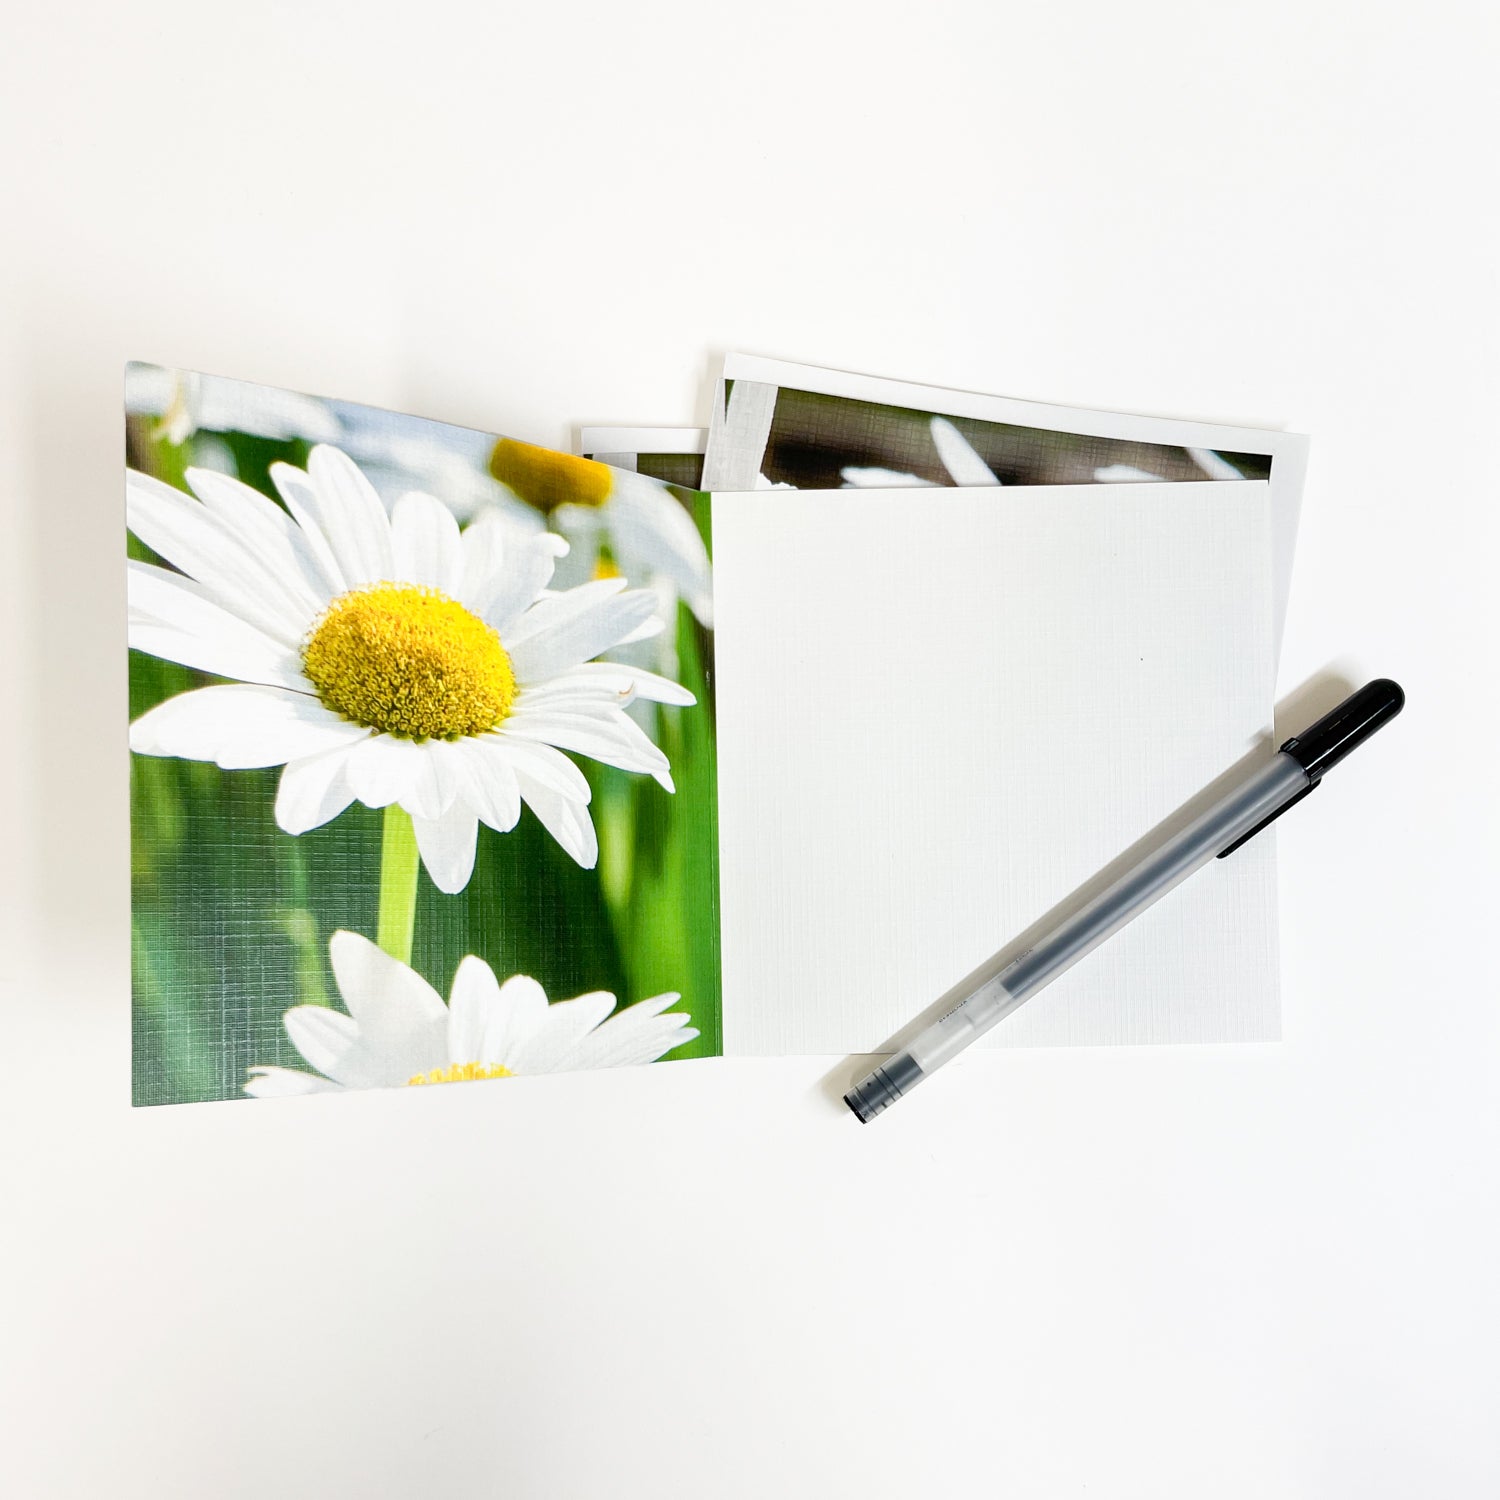 This casually elegant card features acid-free so your handwritten note will serve as a physical reminder of your thoughtfulness long after the recipient receives it. 